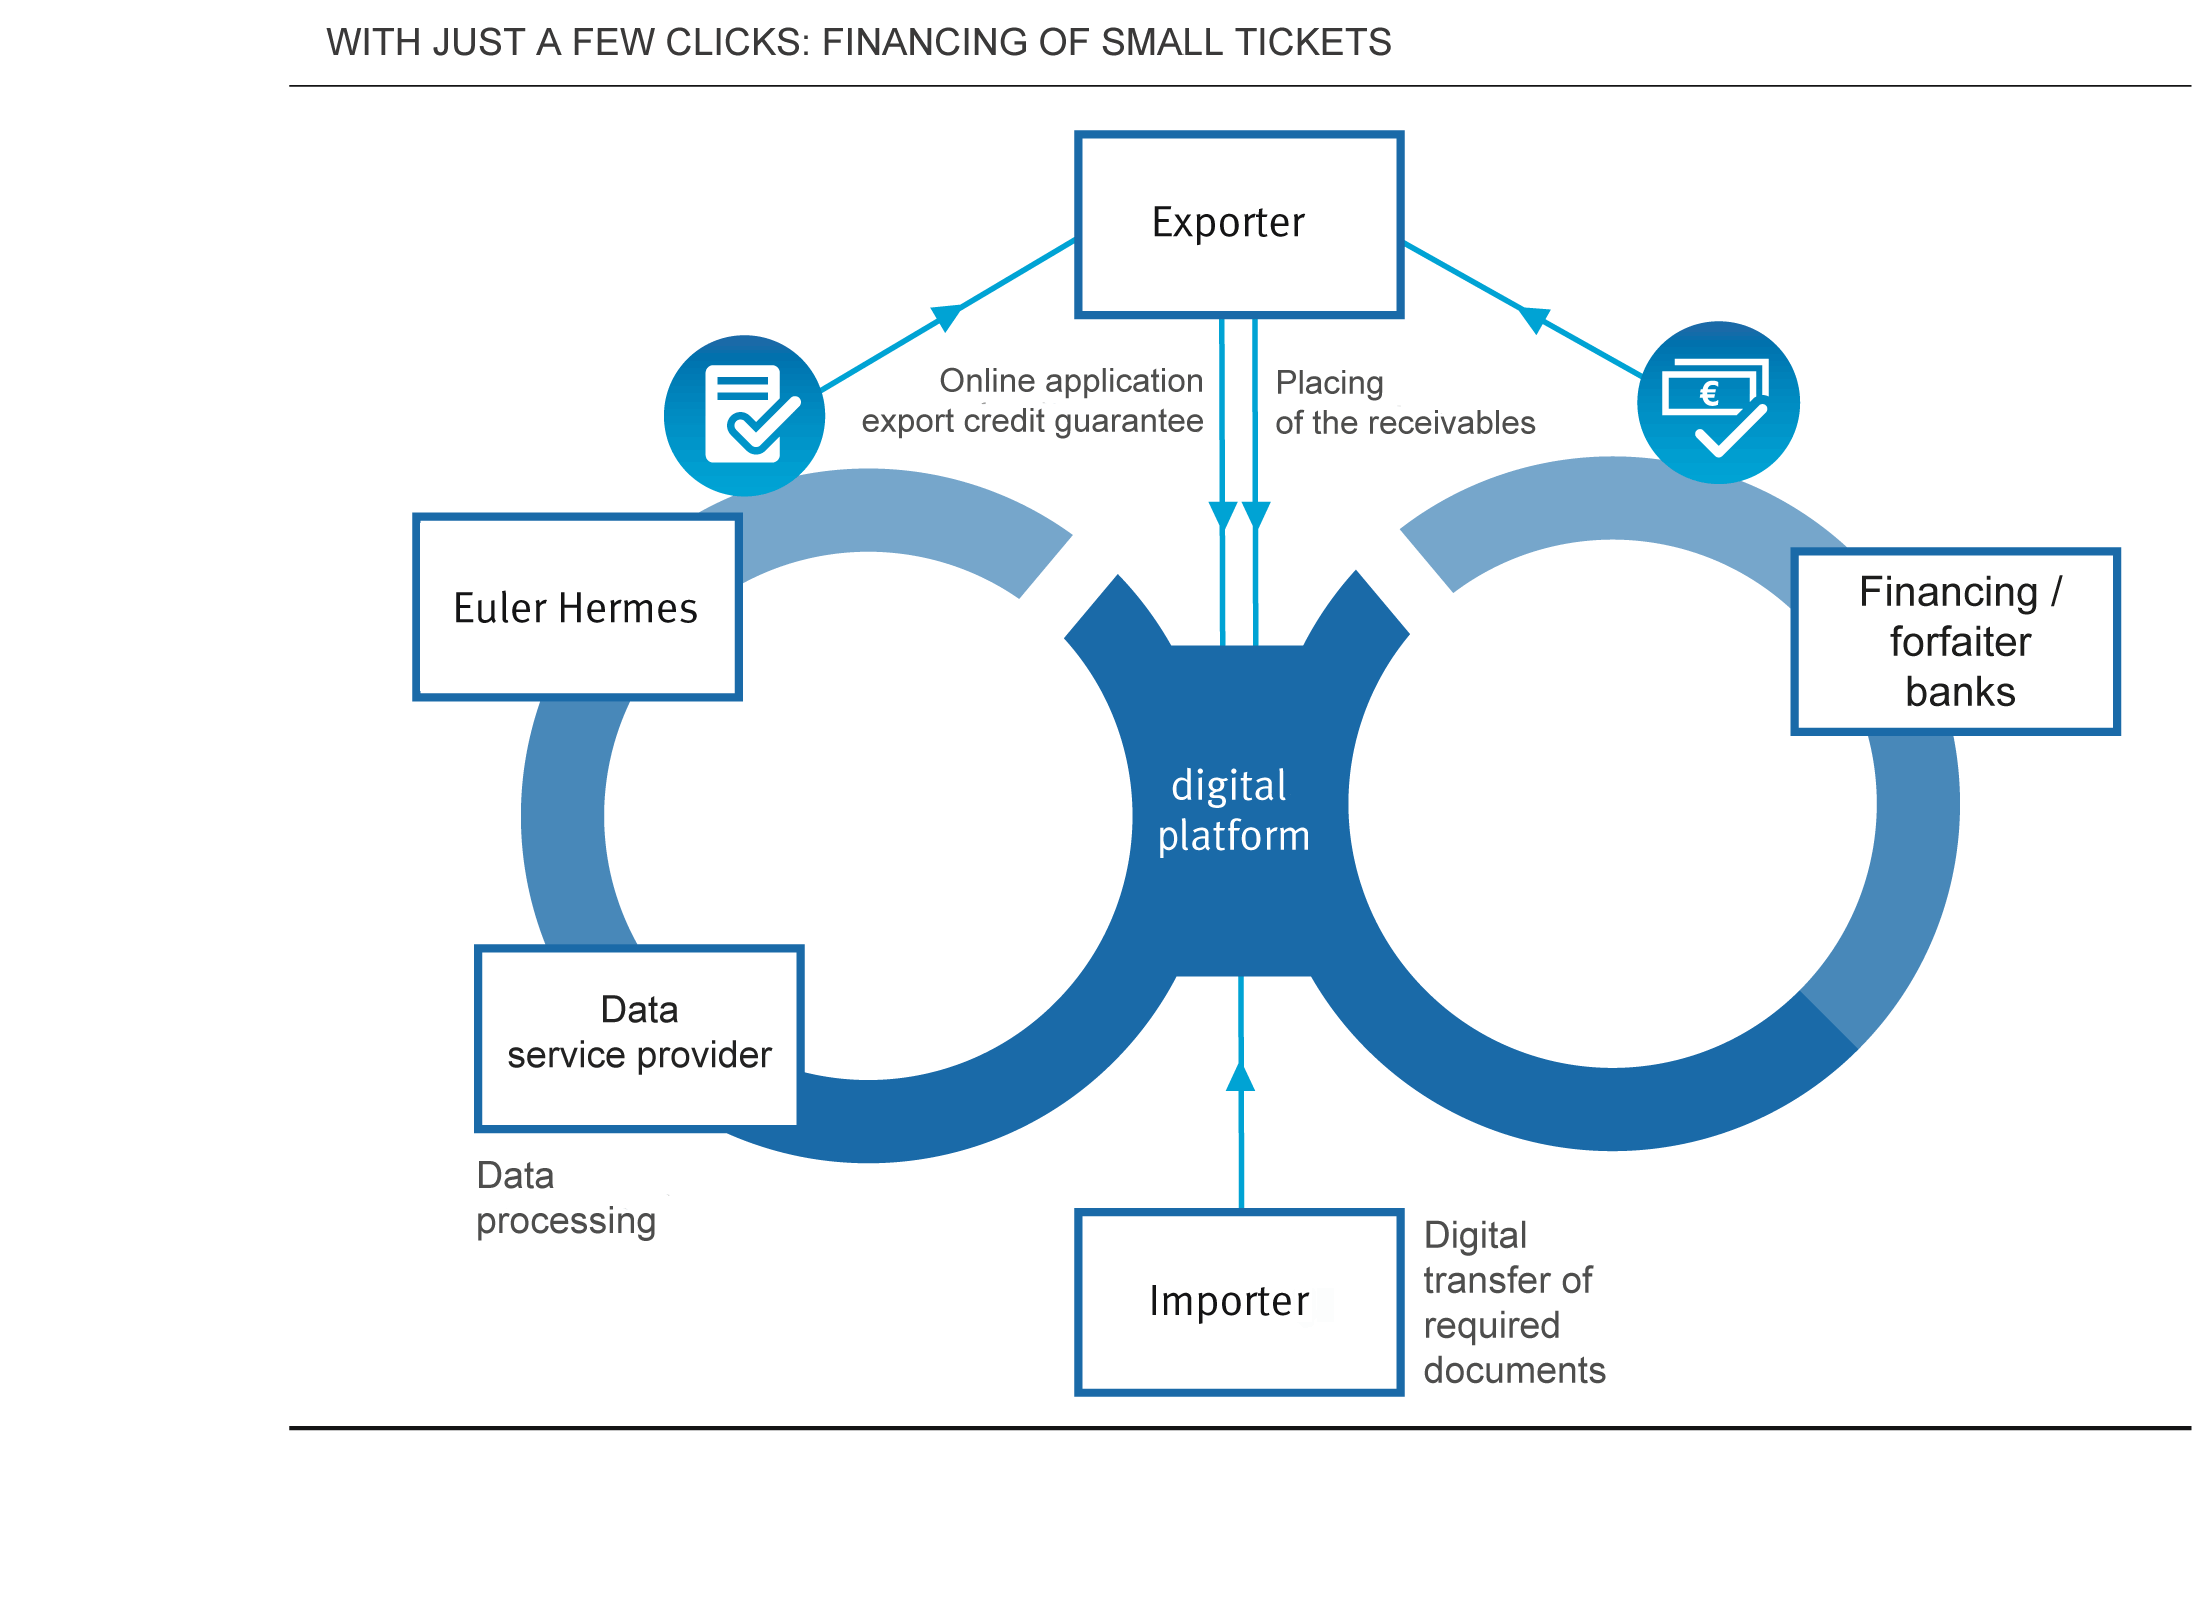 Image: Process for connecting to the online platform